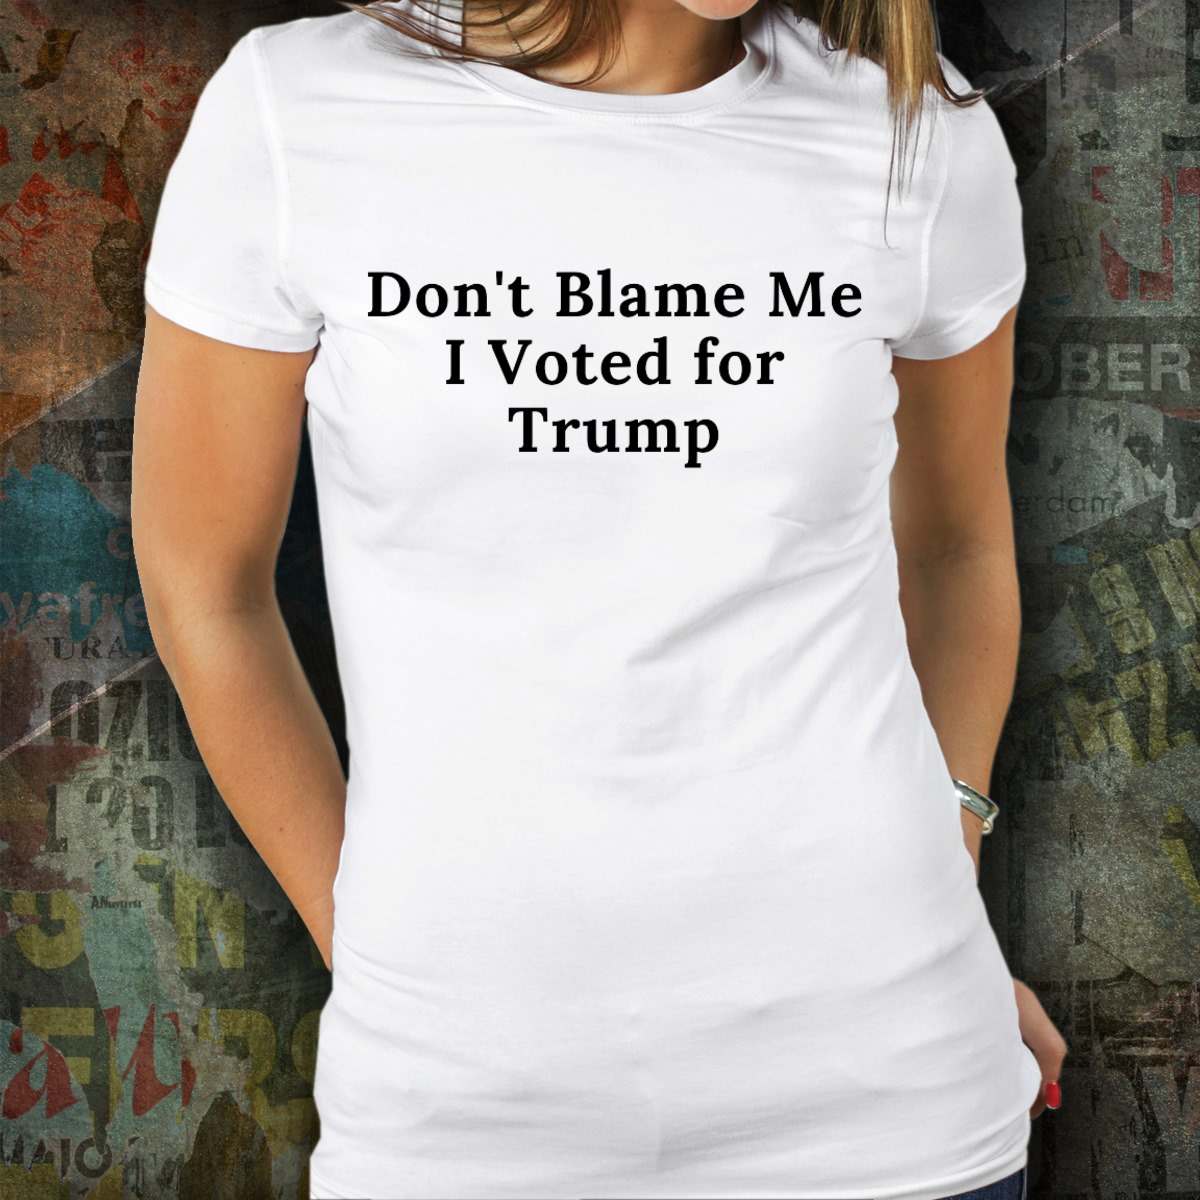 Don't blame me i voted for Trump